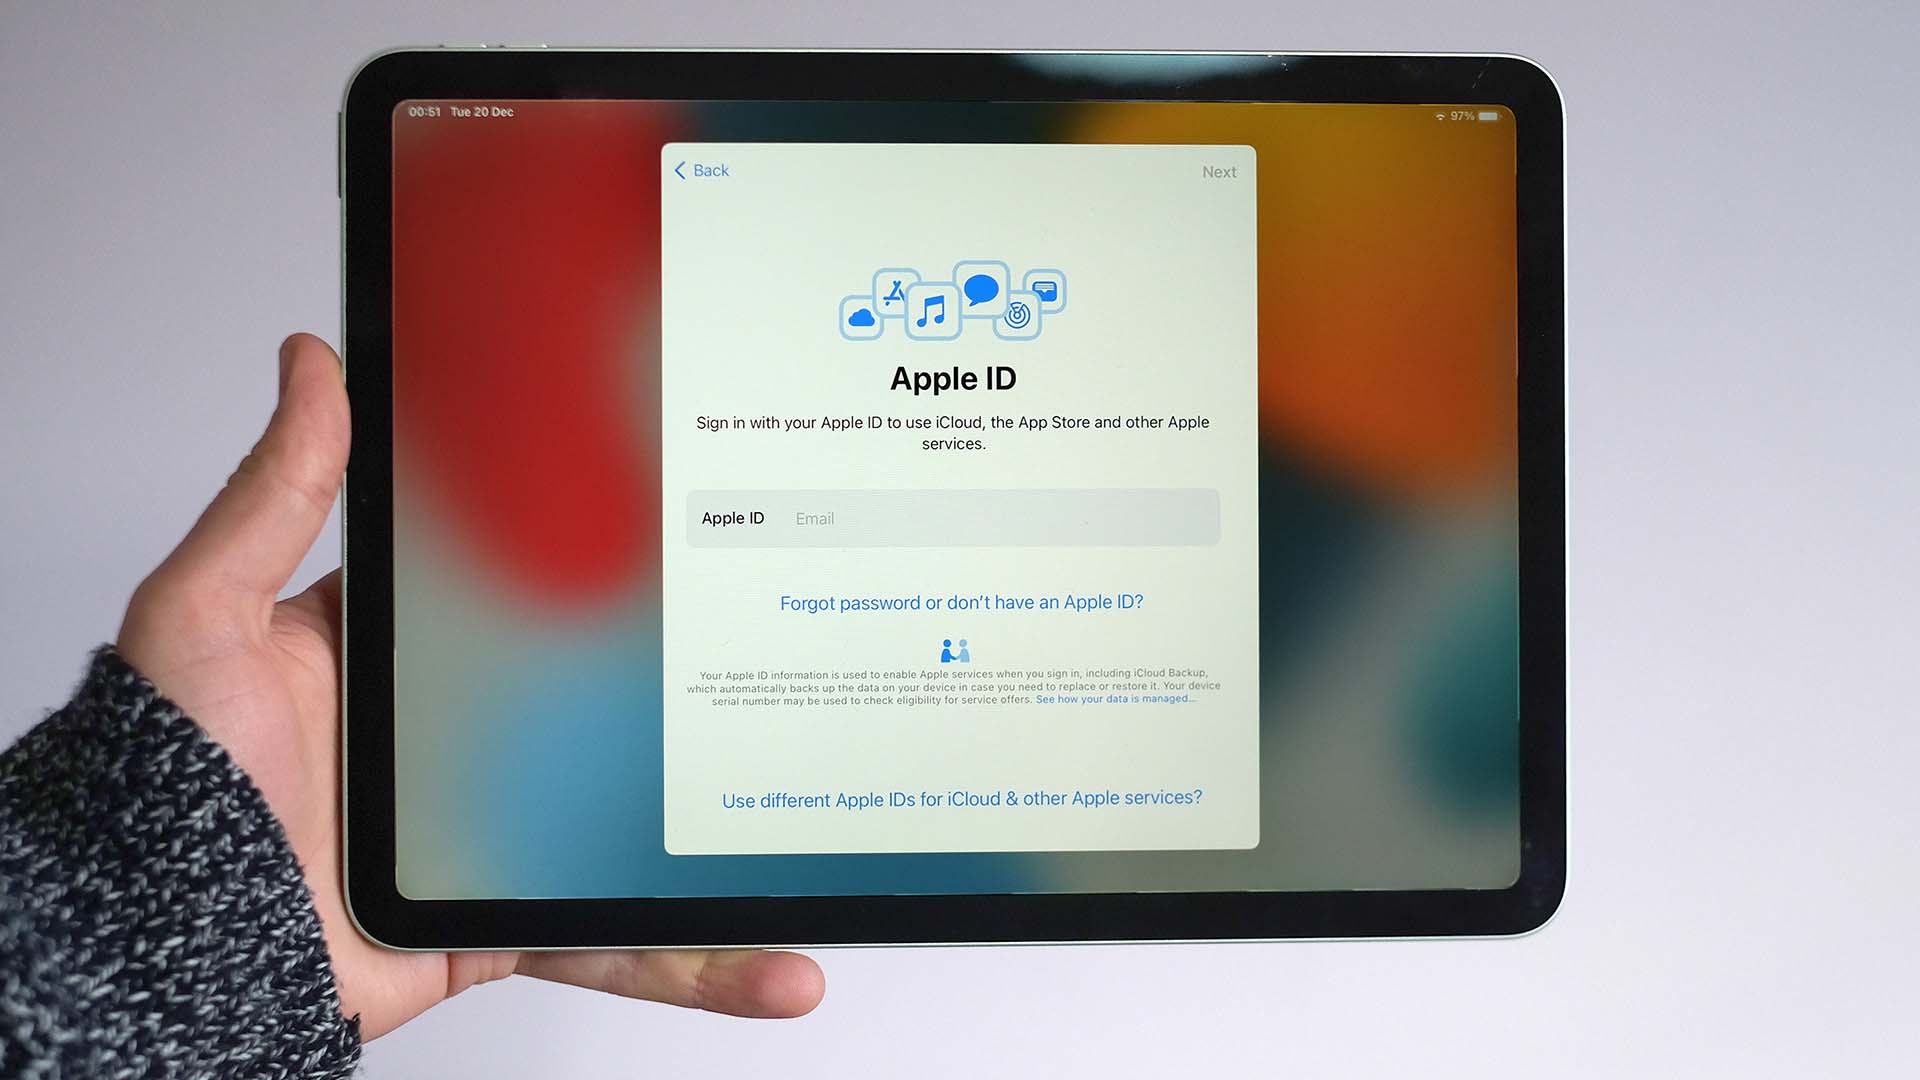 An iPad with the screen showing the Apple ID log in page